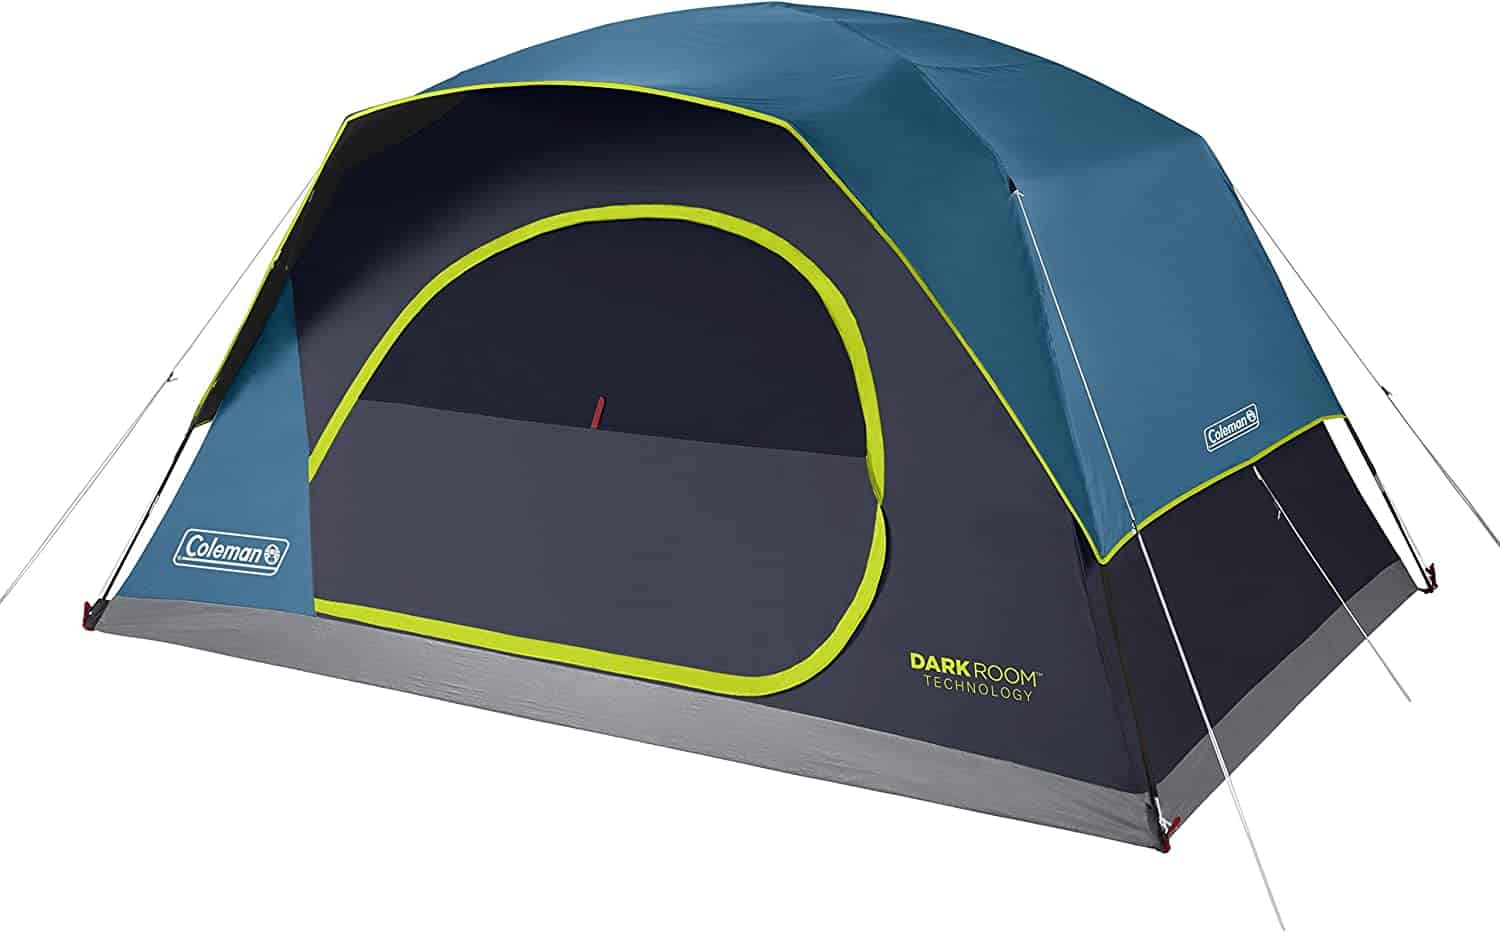 Coleman Skydome 8-person Camping Tent With Dark Room Technology